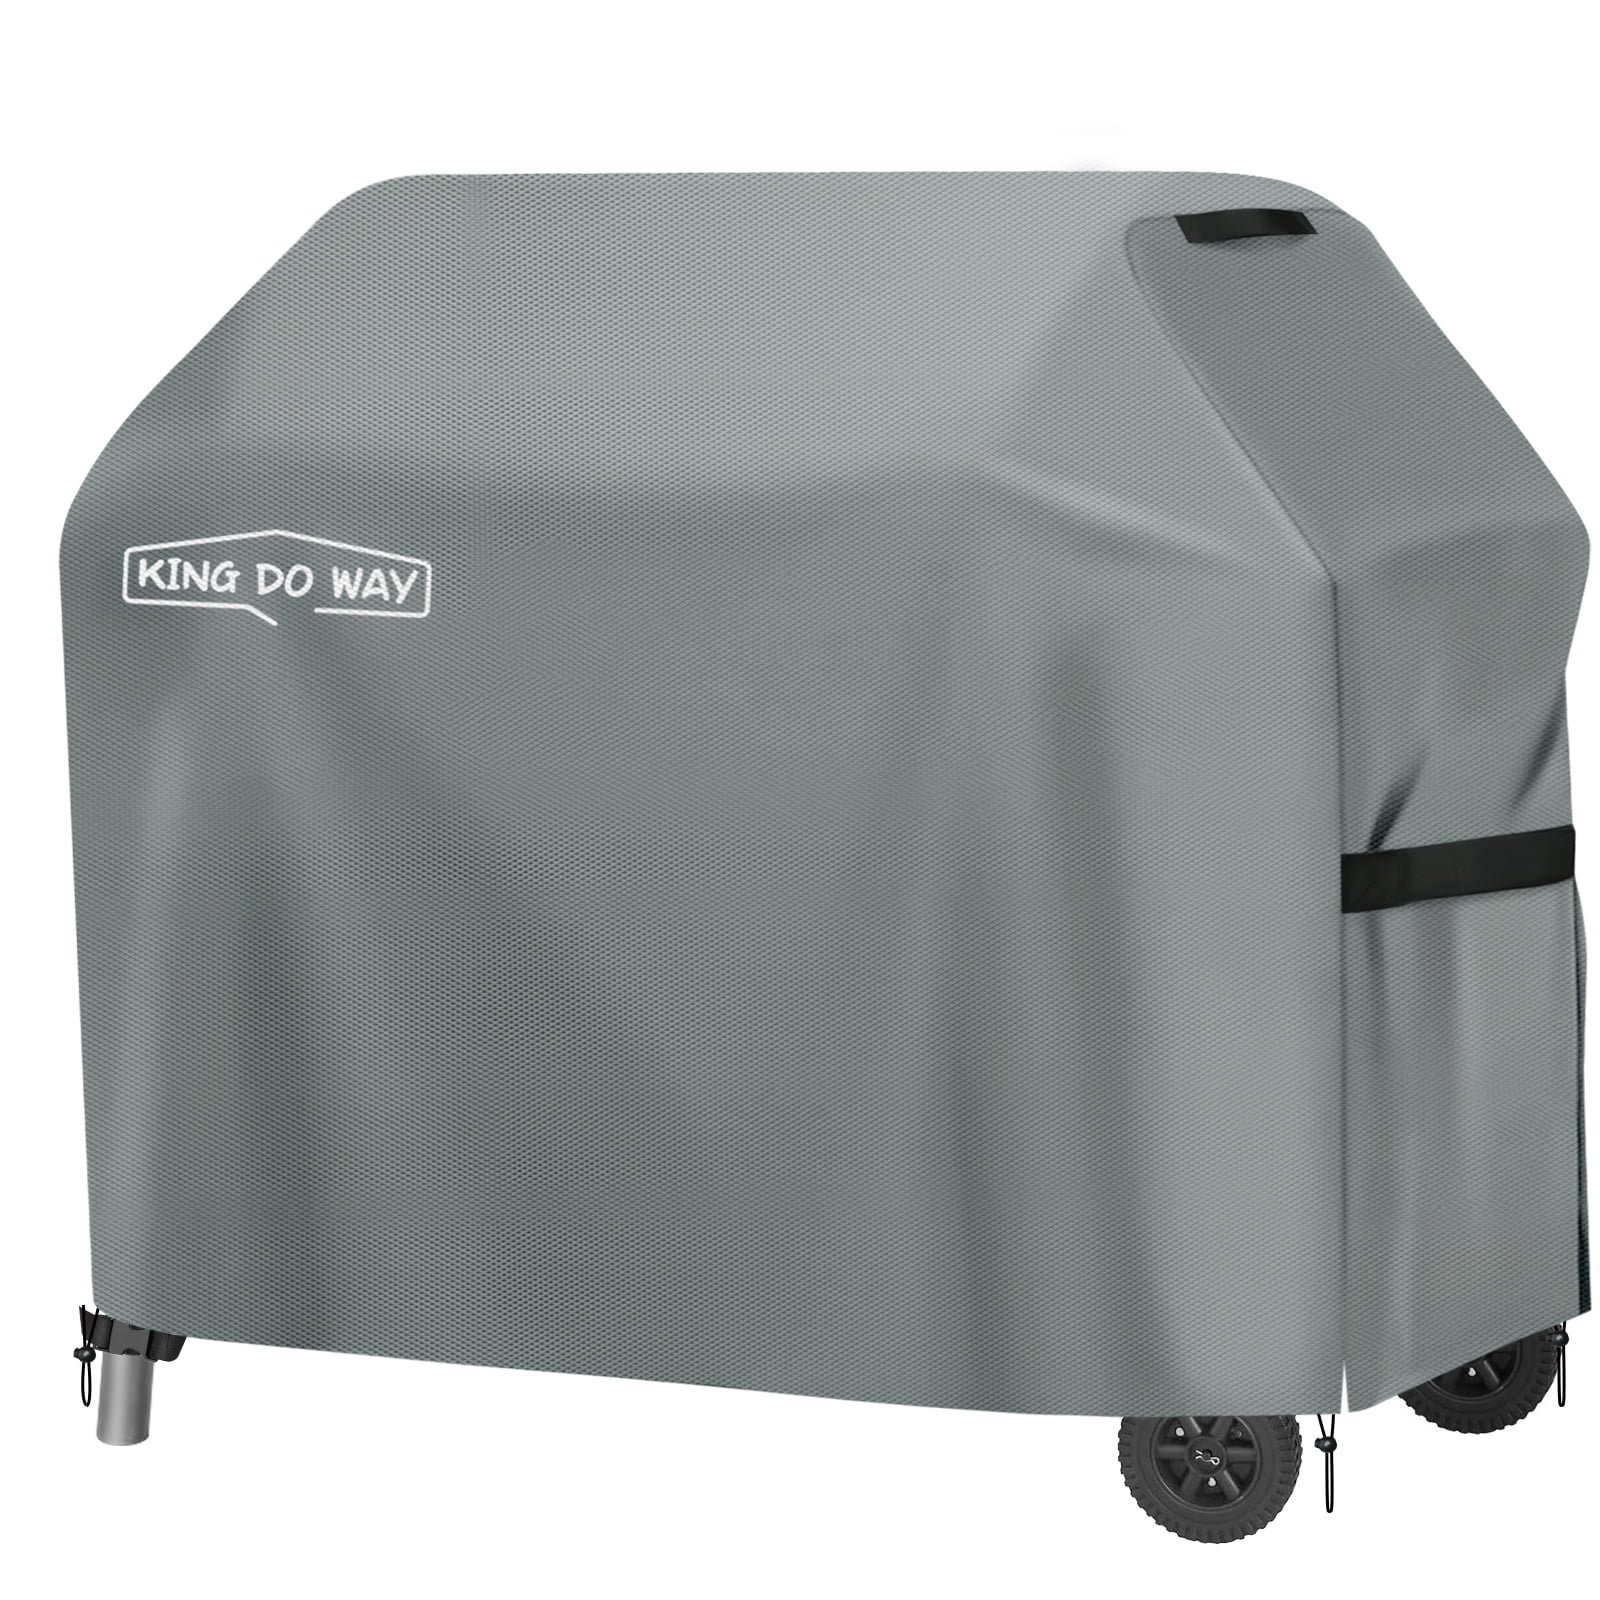 BBQ Grill Cover 58" X 24" X 48" Suitable for Weber Oxford Fabric is Waterproof 